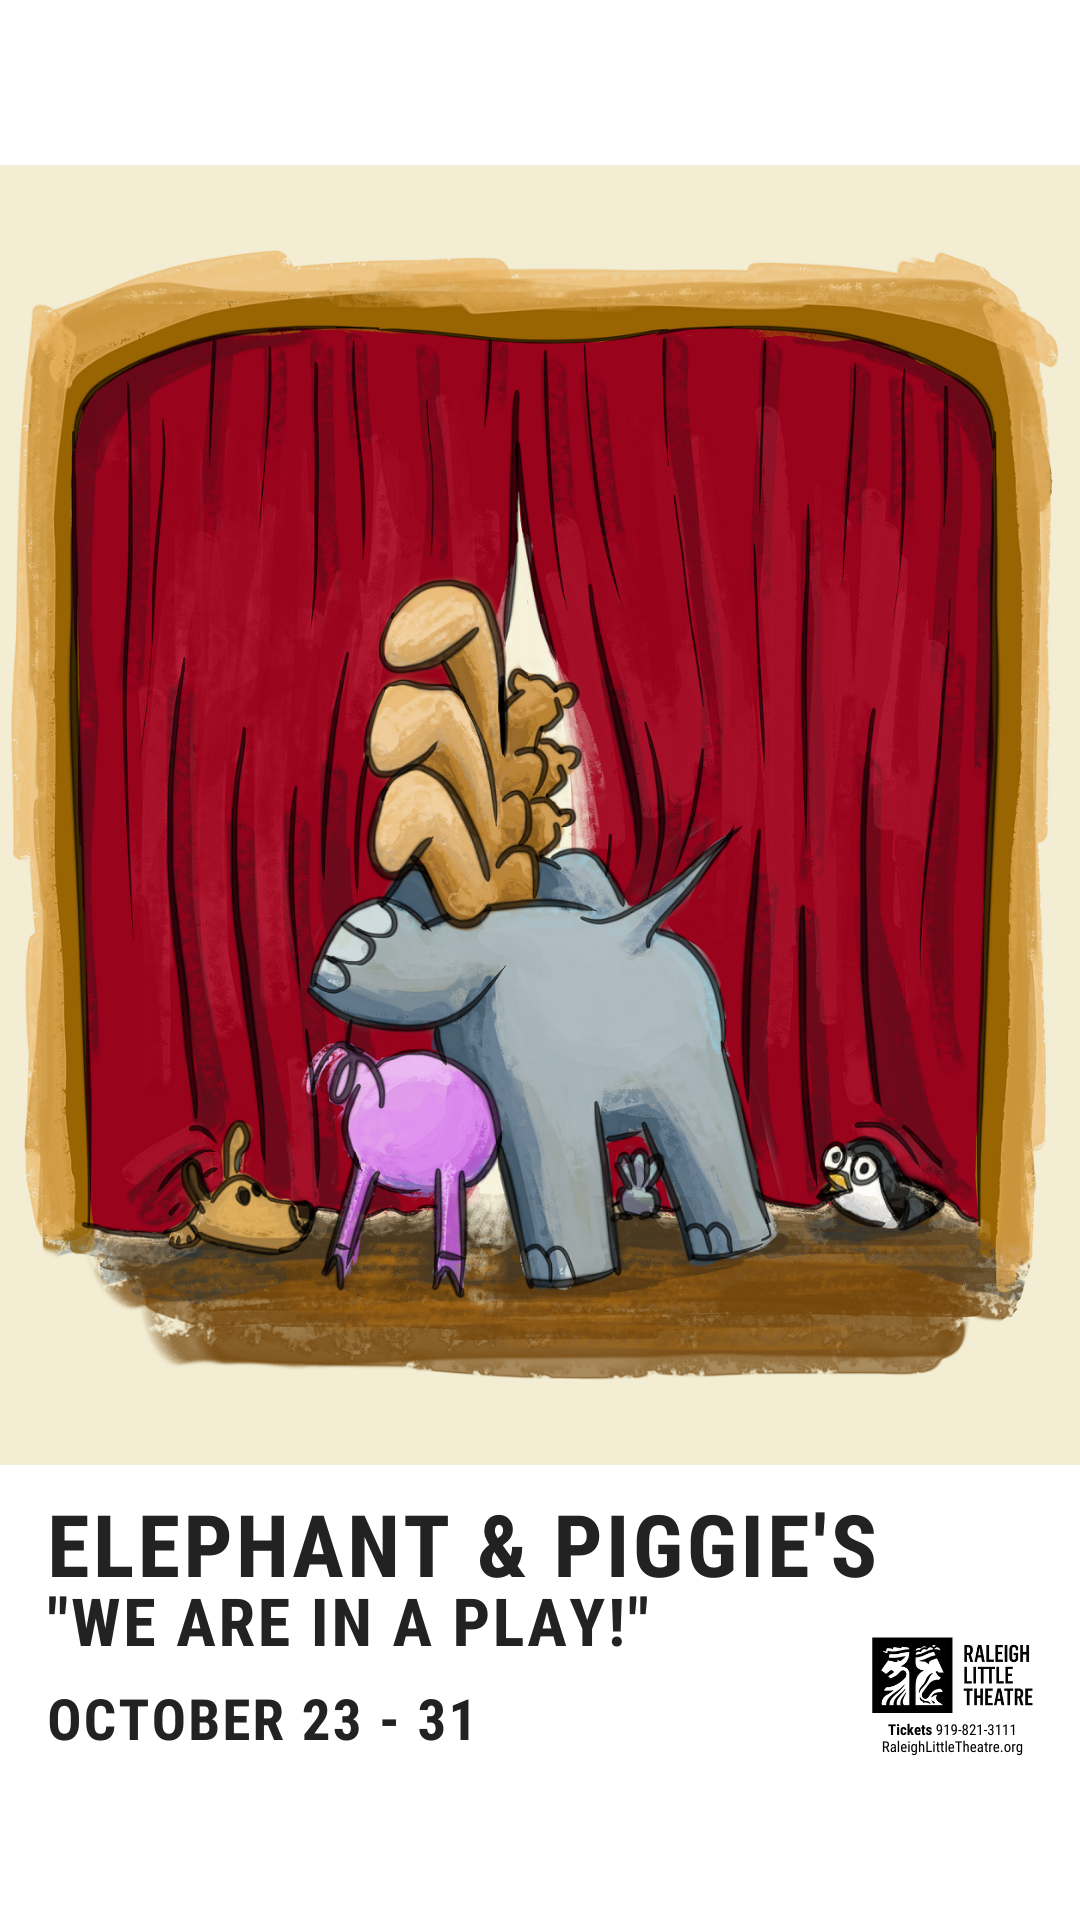 Image for Elephant & Piggie's "We Are in a Play!"